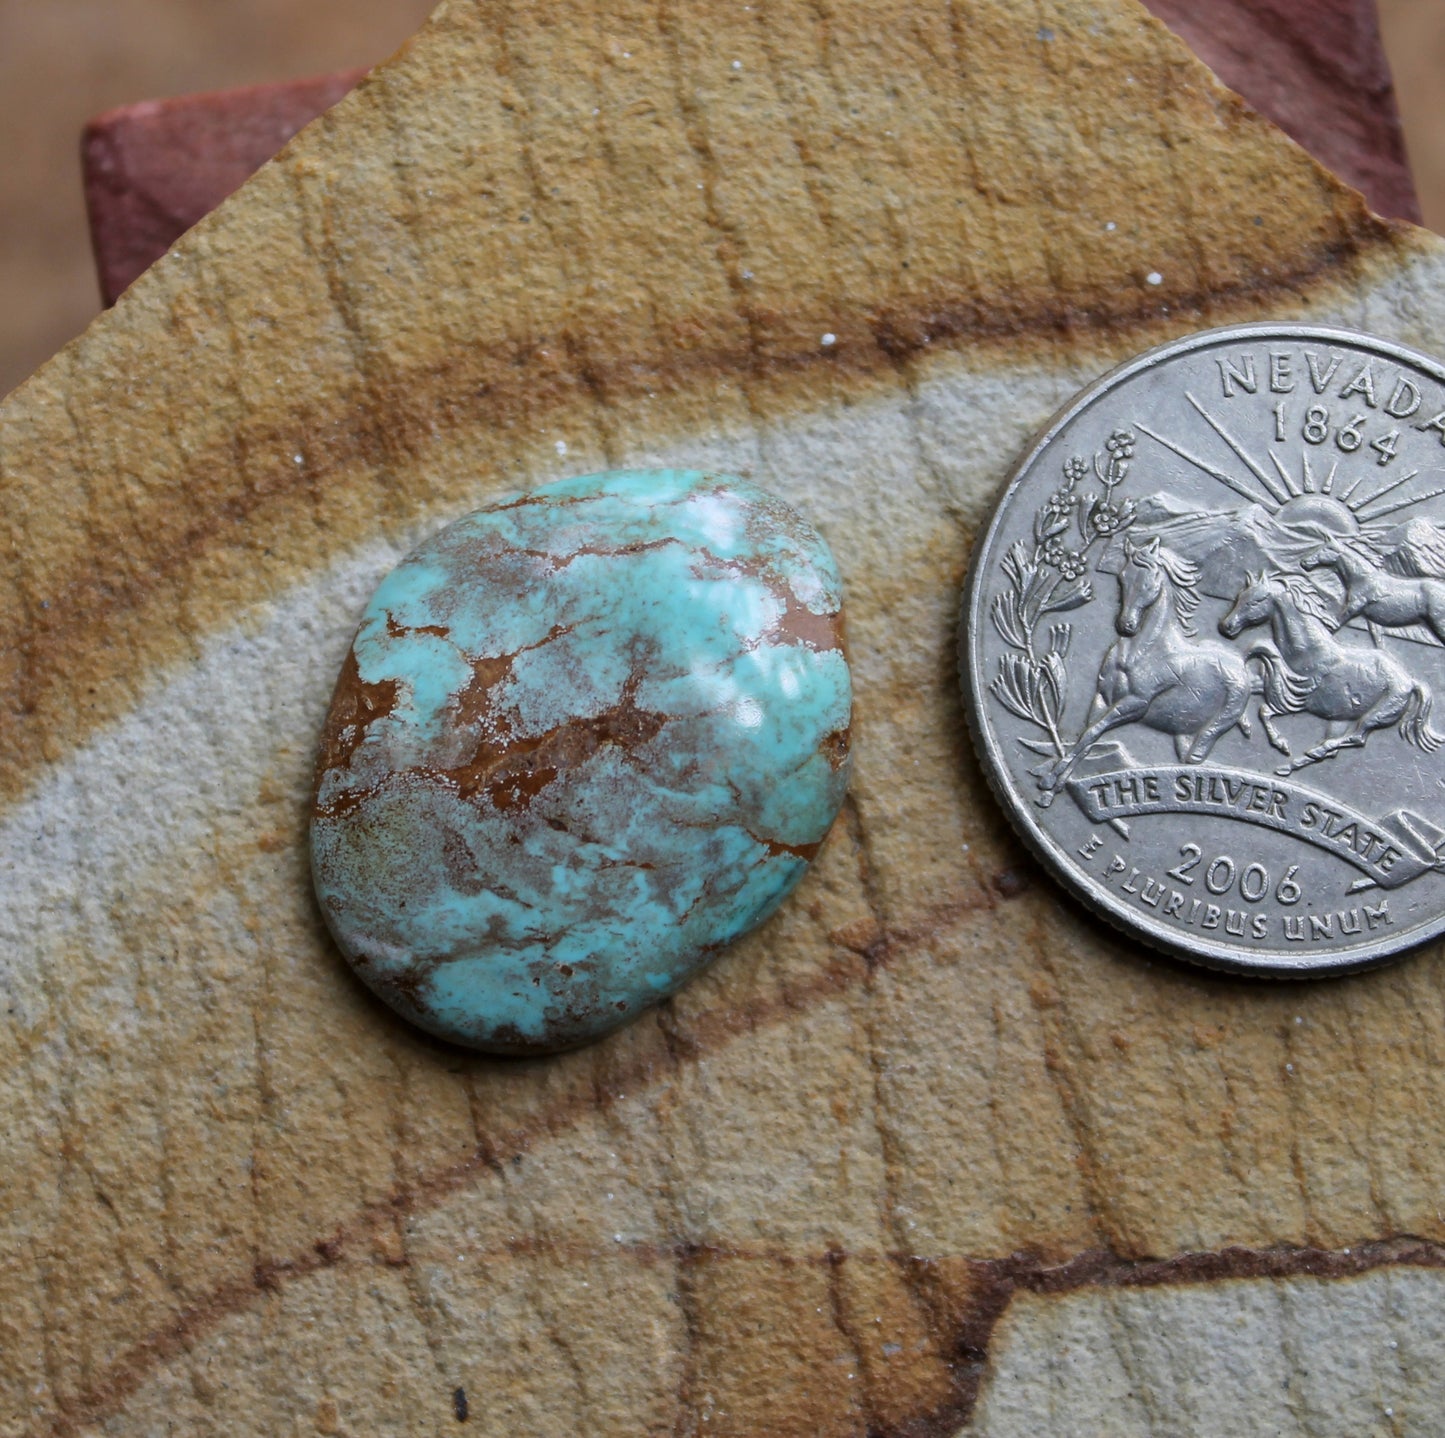 12 carat blue turquoise cabochons from Stone Mountain Mine with red inclusions